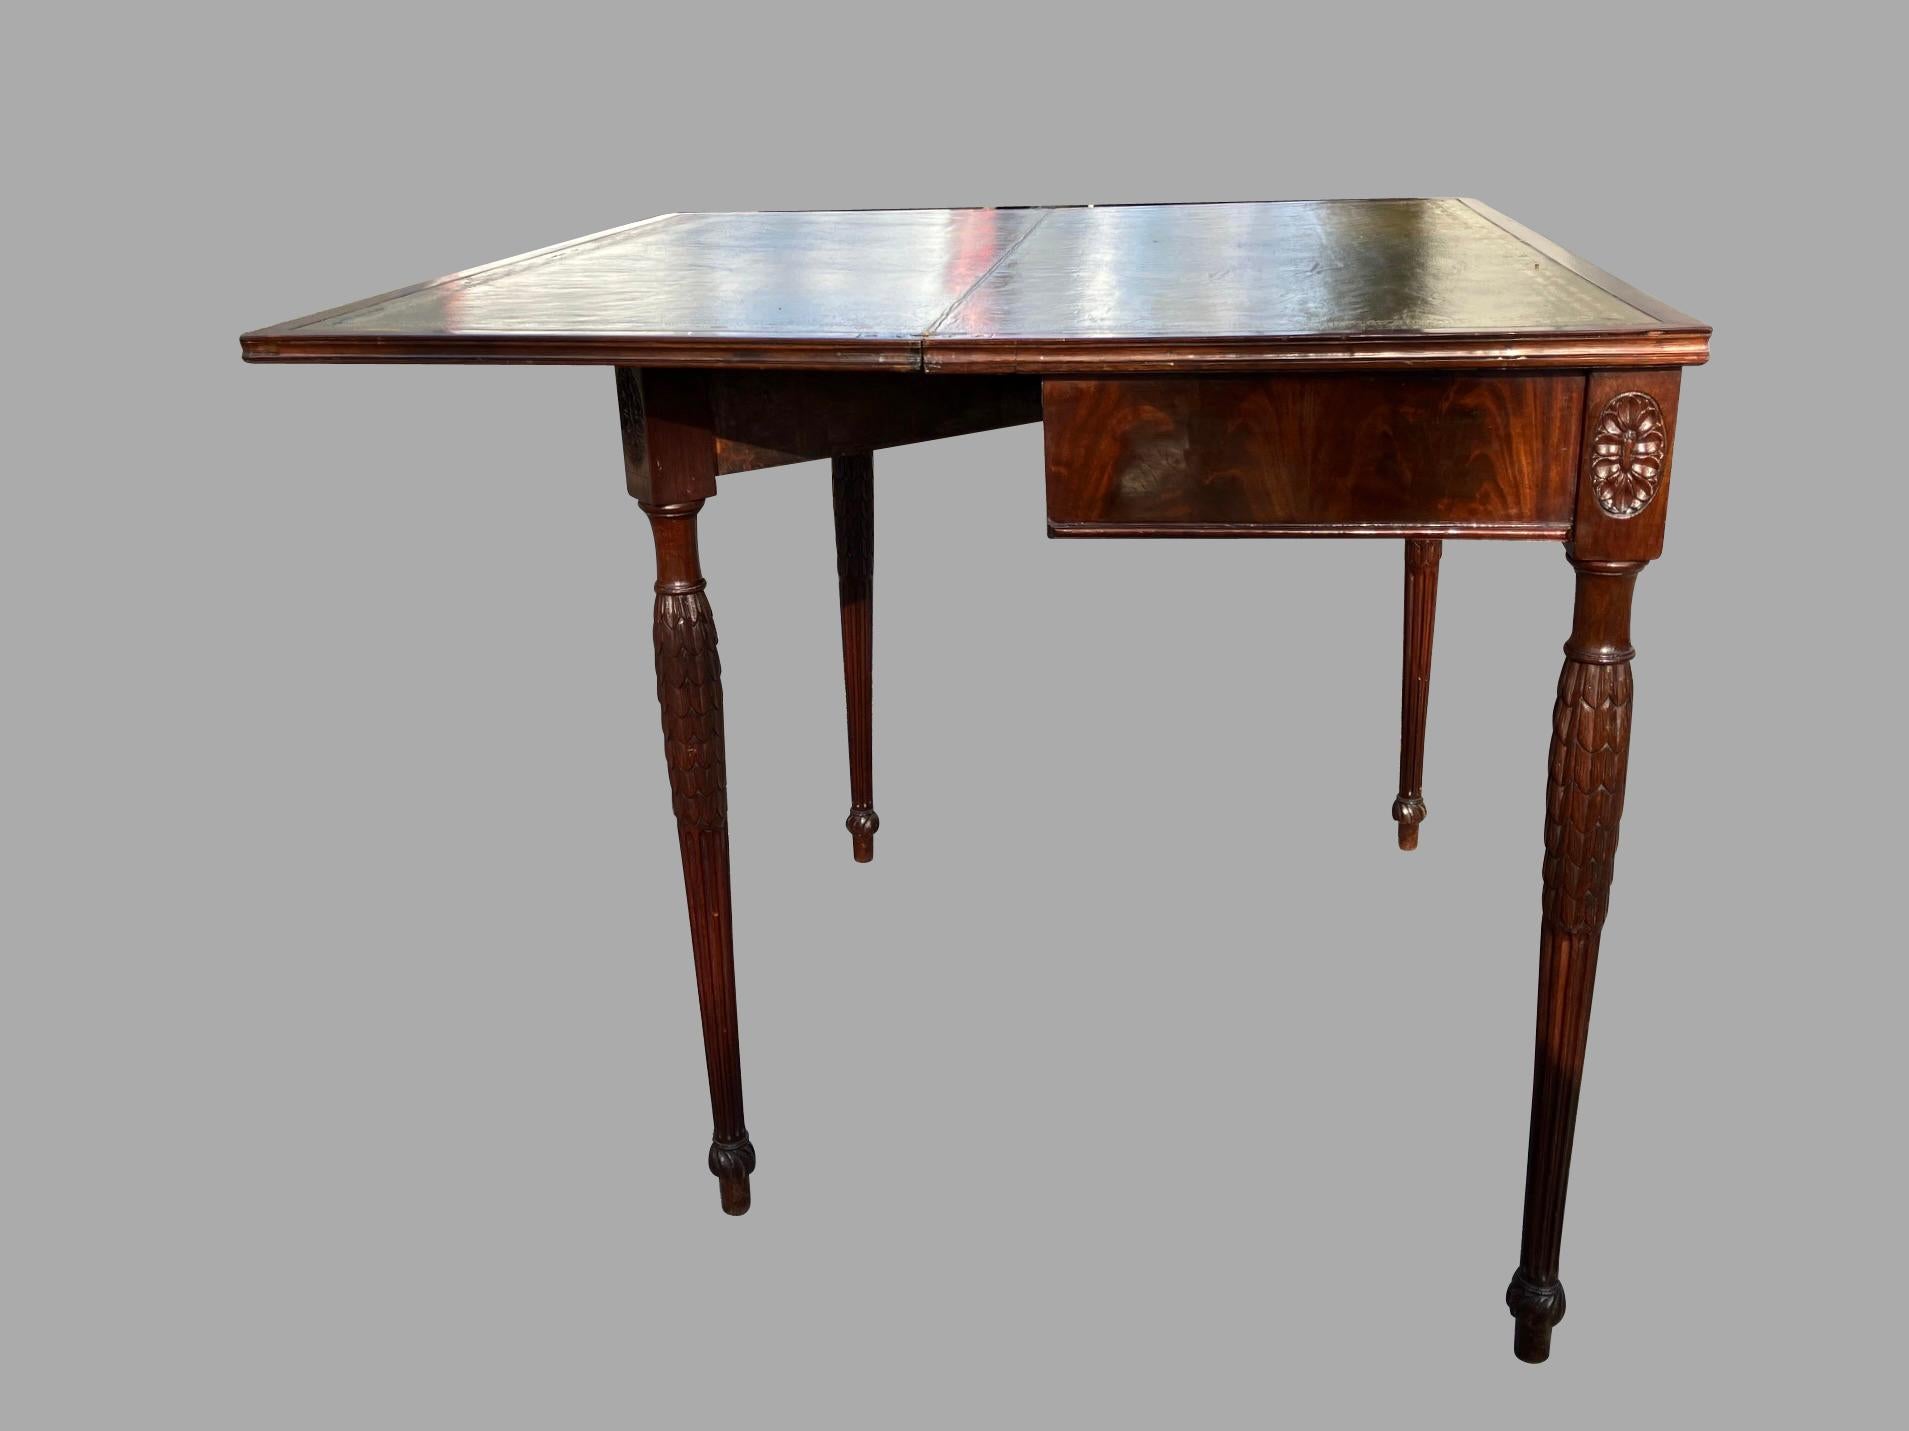 English Sheraton Mahogany Flip Top Games Table with Gilt-Tooled Leather Top  For Sale 3